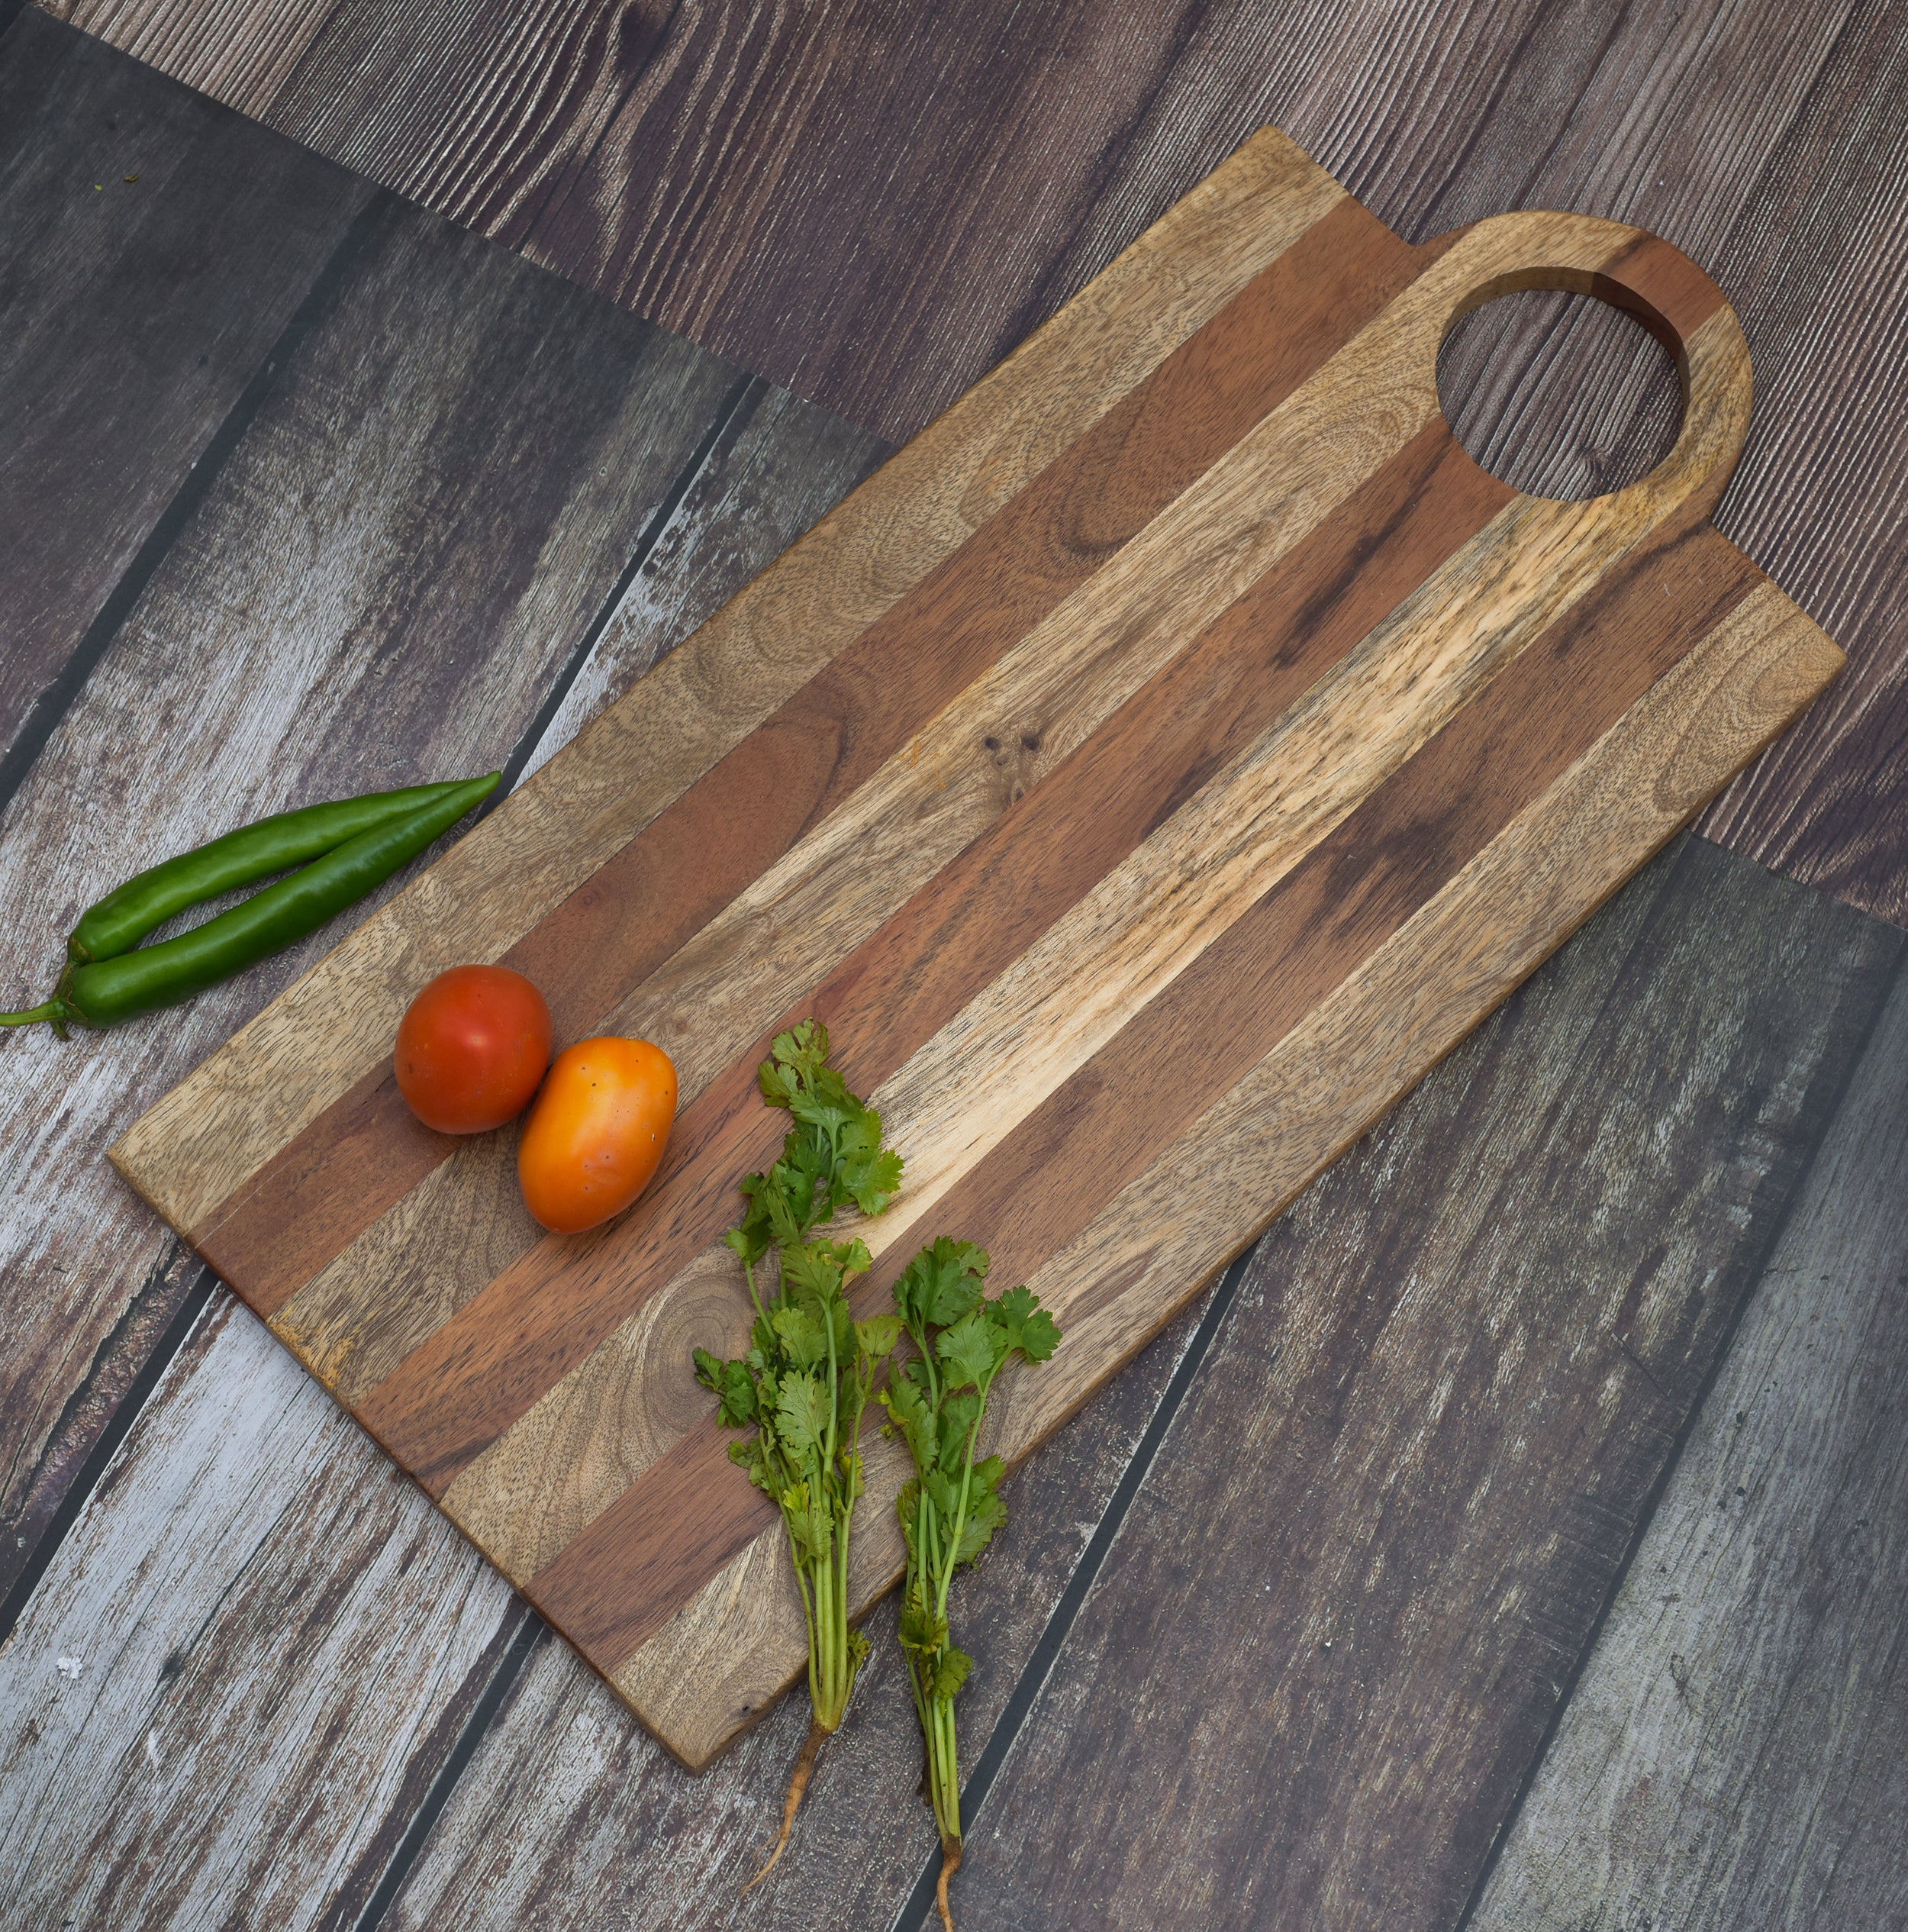 MIXWOOD CHOPPING BOARD WITH ROUND WOODEN HANDLE